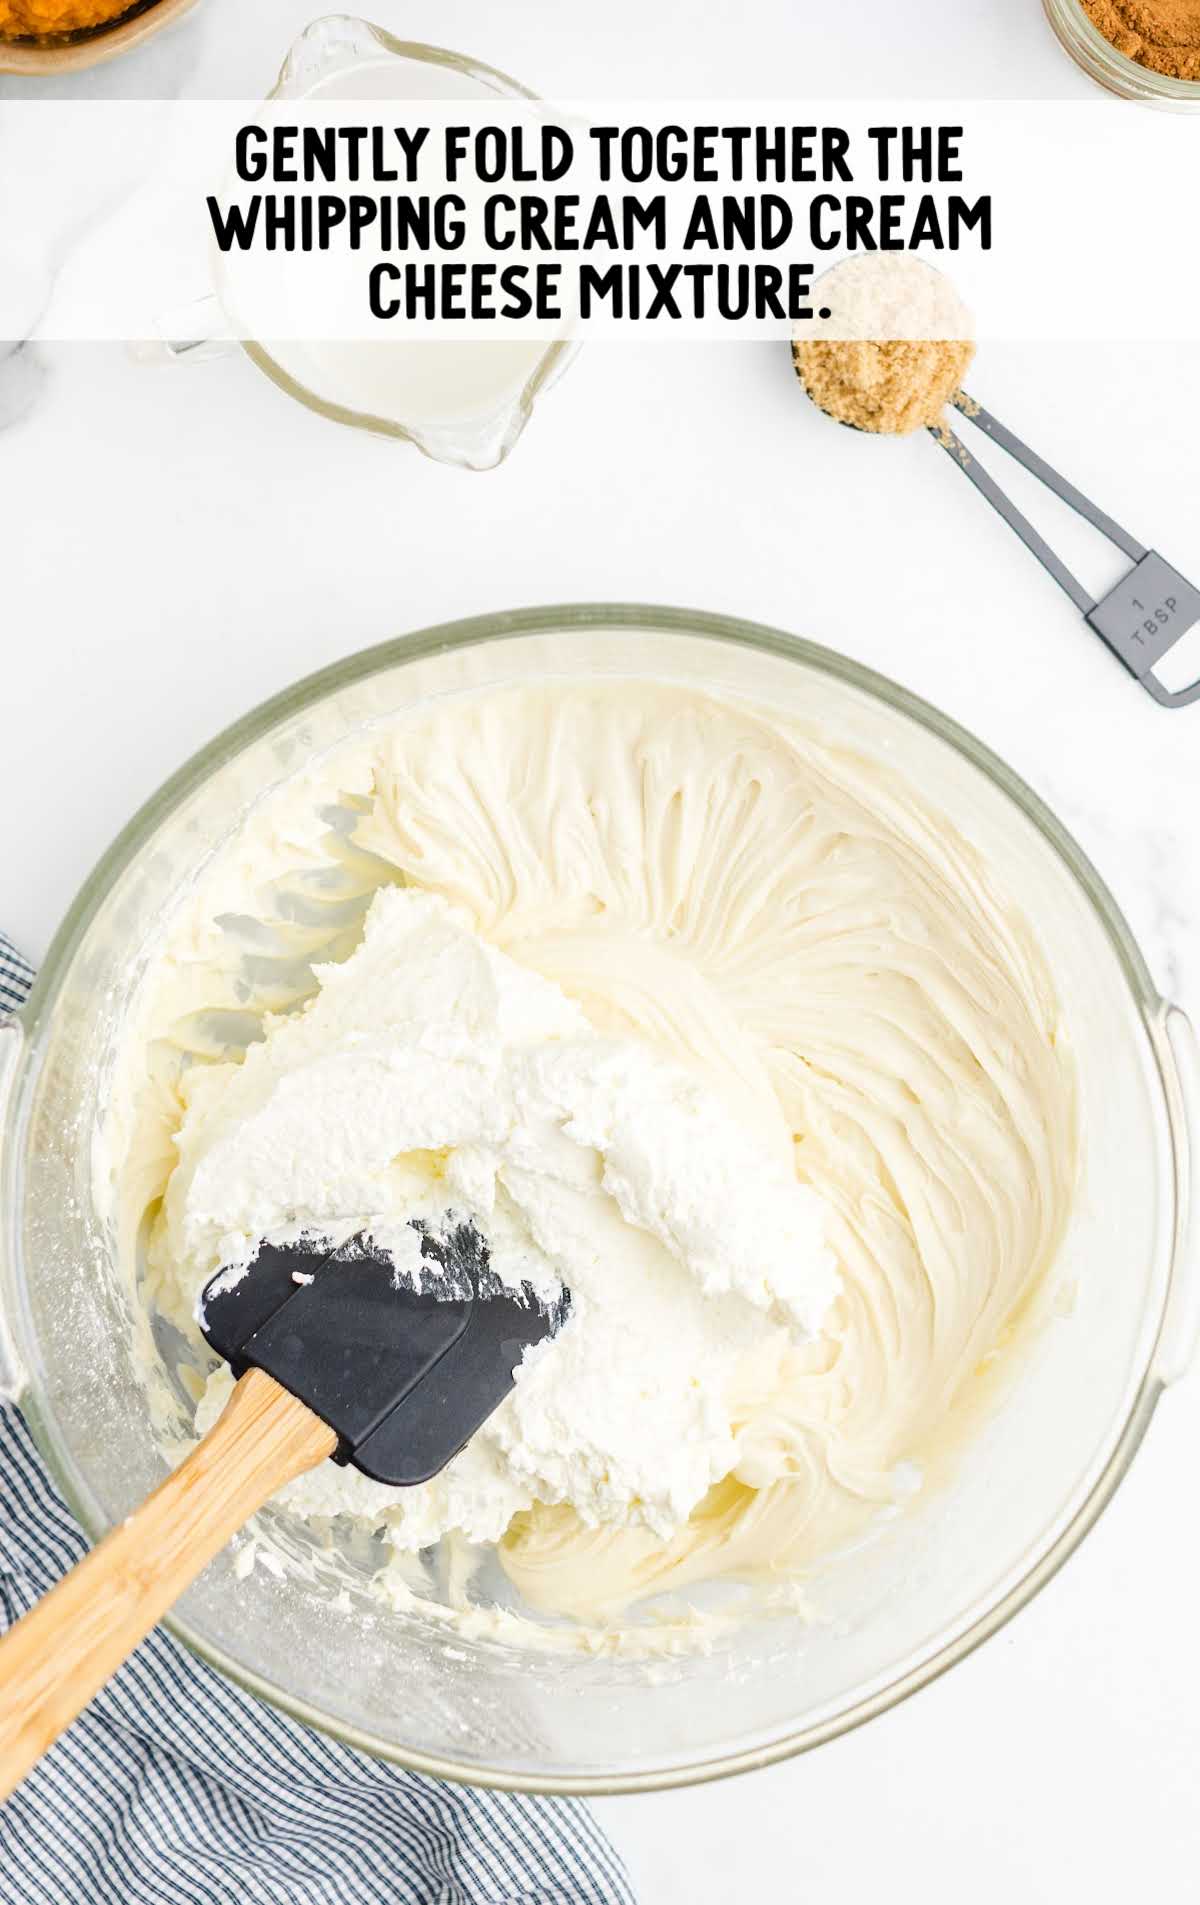 whipped cream and cream cheese mixture being folded together in a bowl